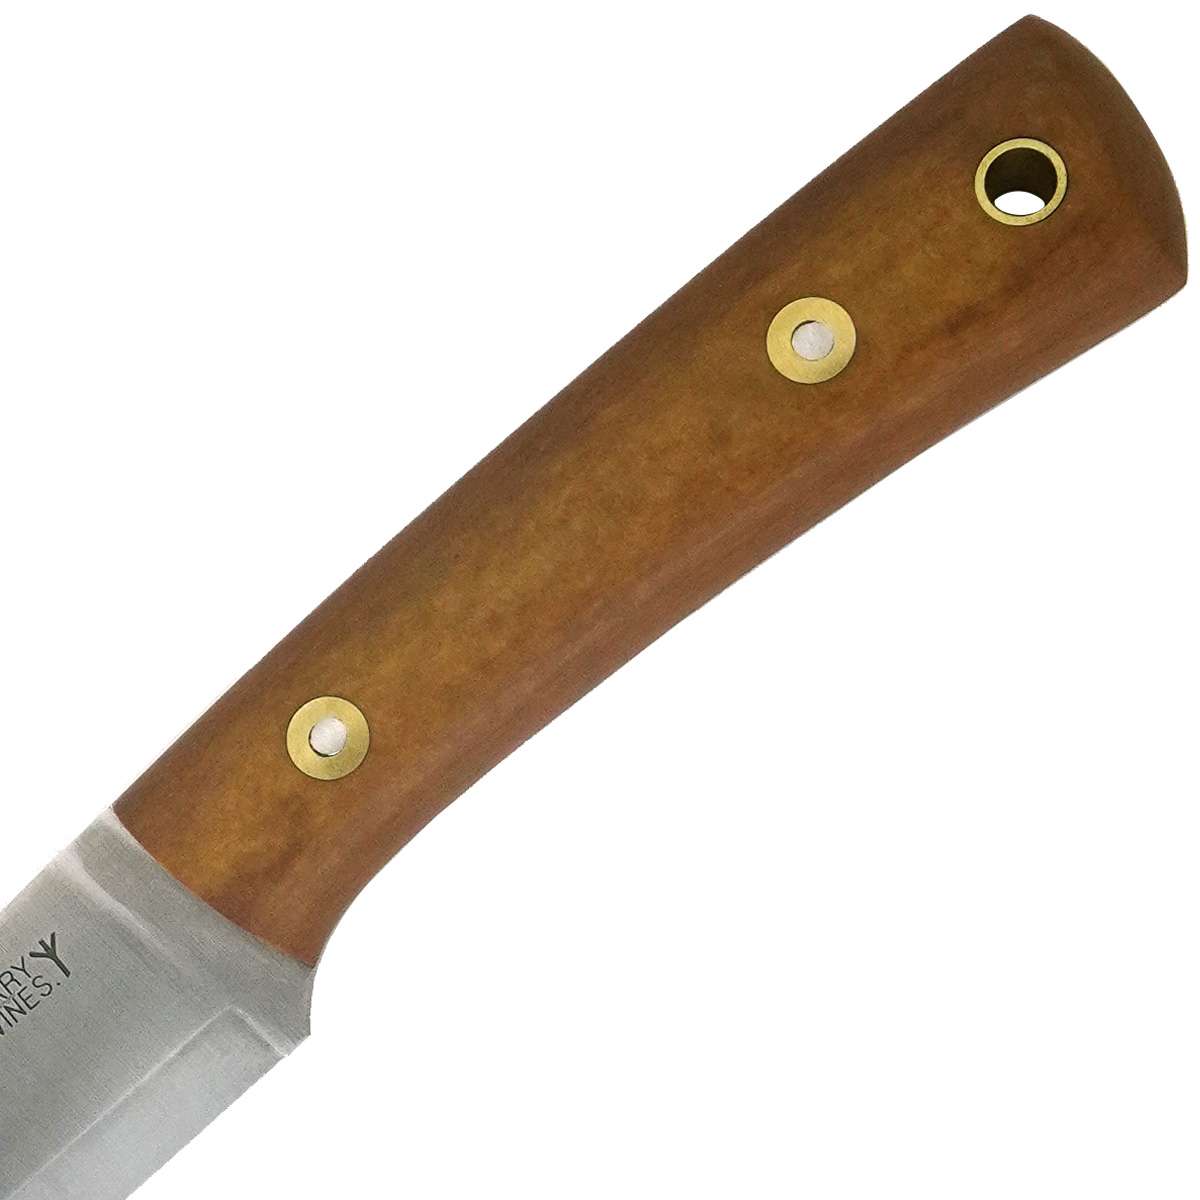 LT Wright Gary Wines Bushcrafter 01 Knife - Maple Paper Matte